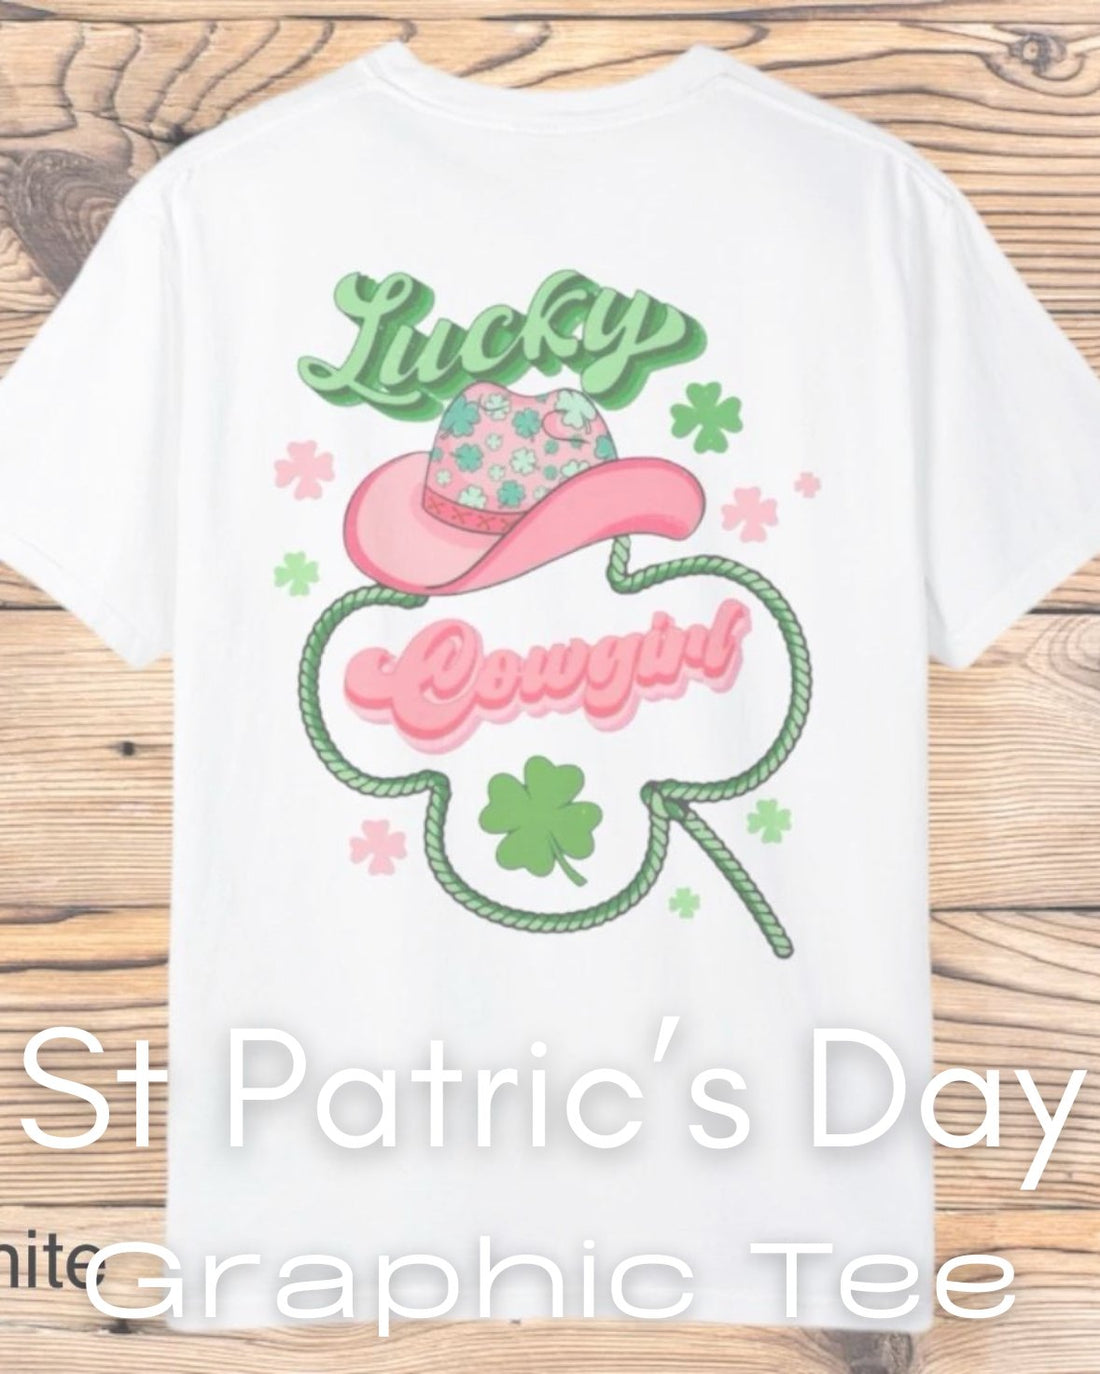  St Patrick Day Graphic Tee